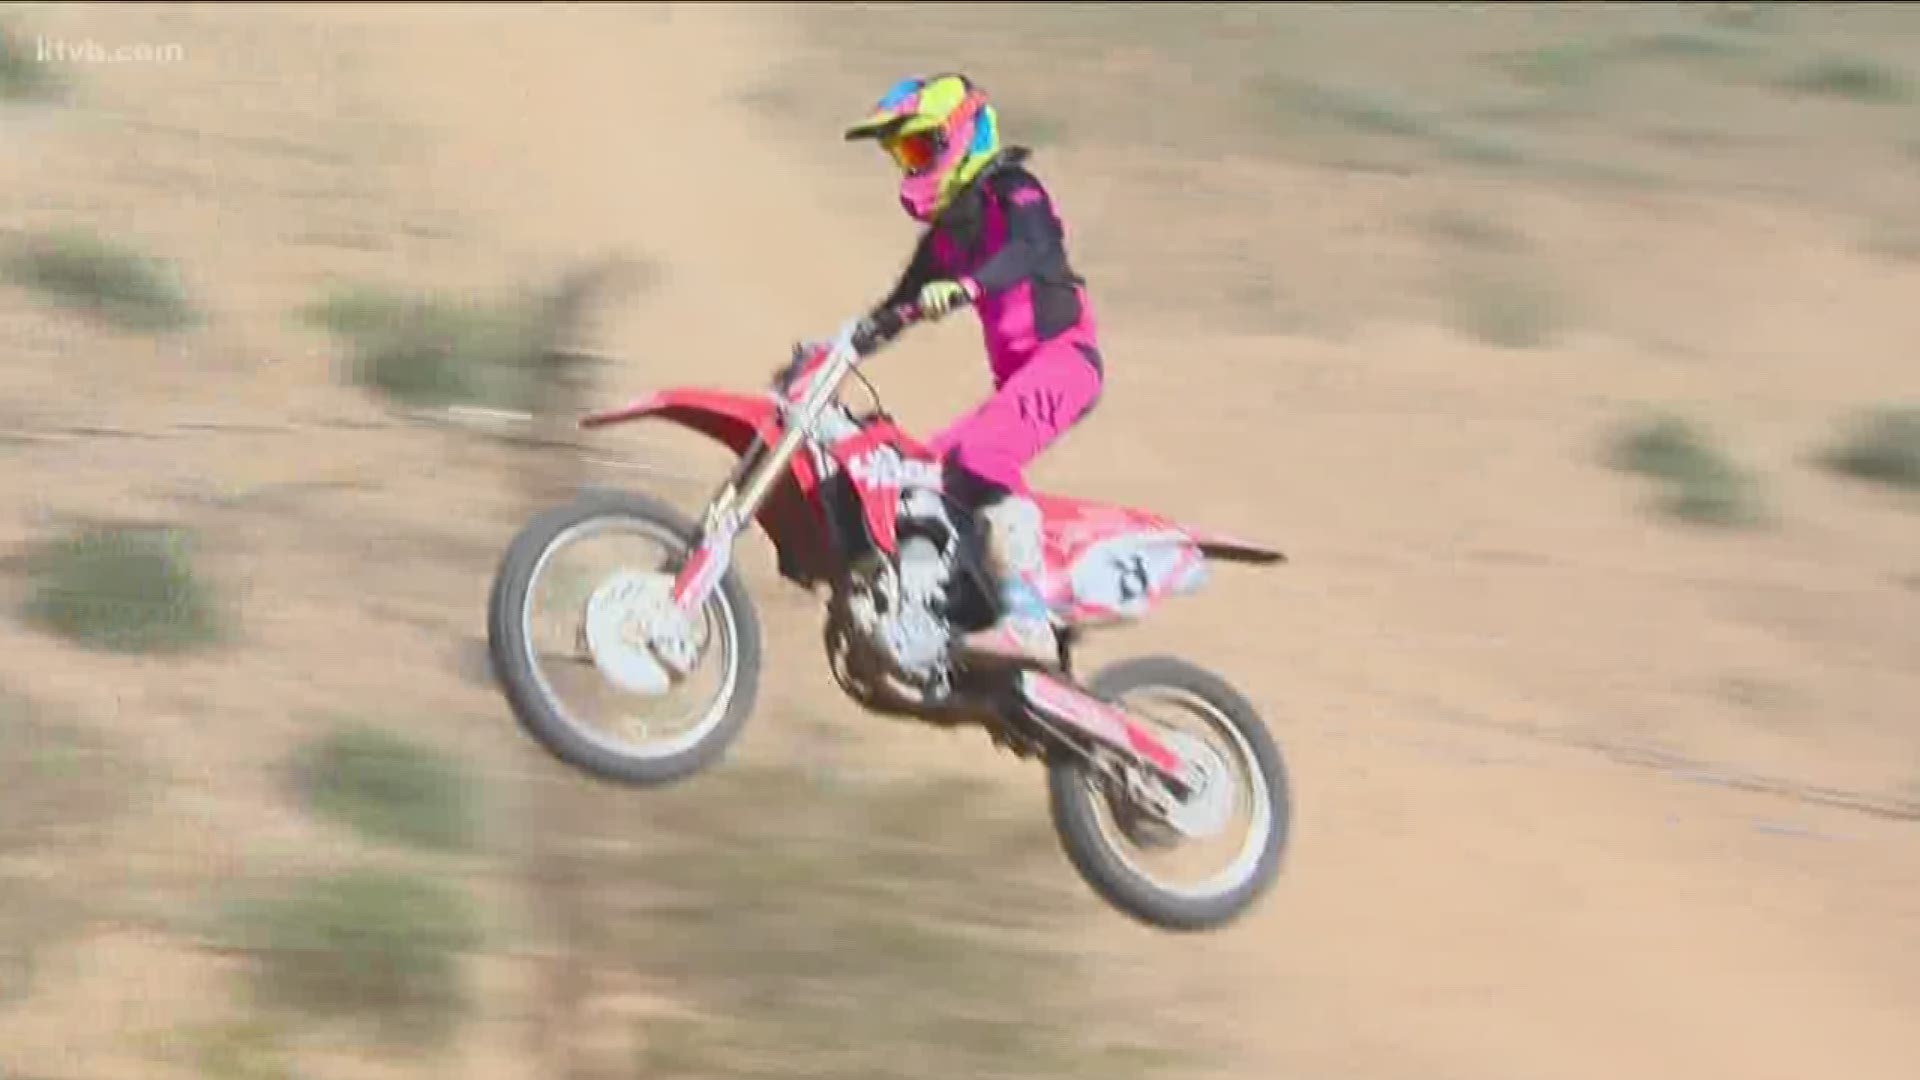 Motocross race to benefit St. Jude Foundations